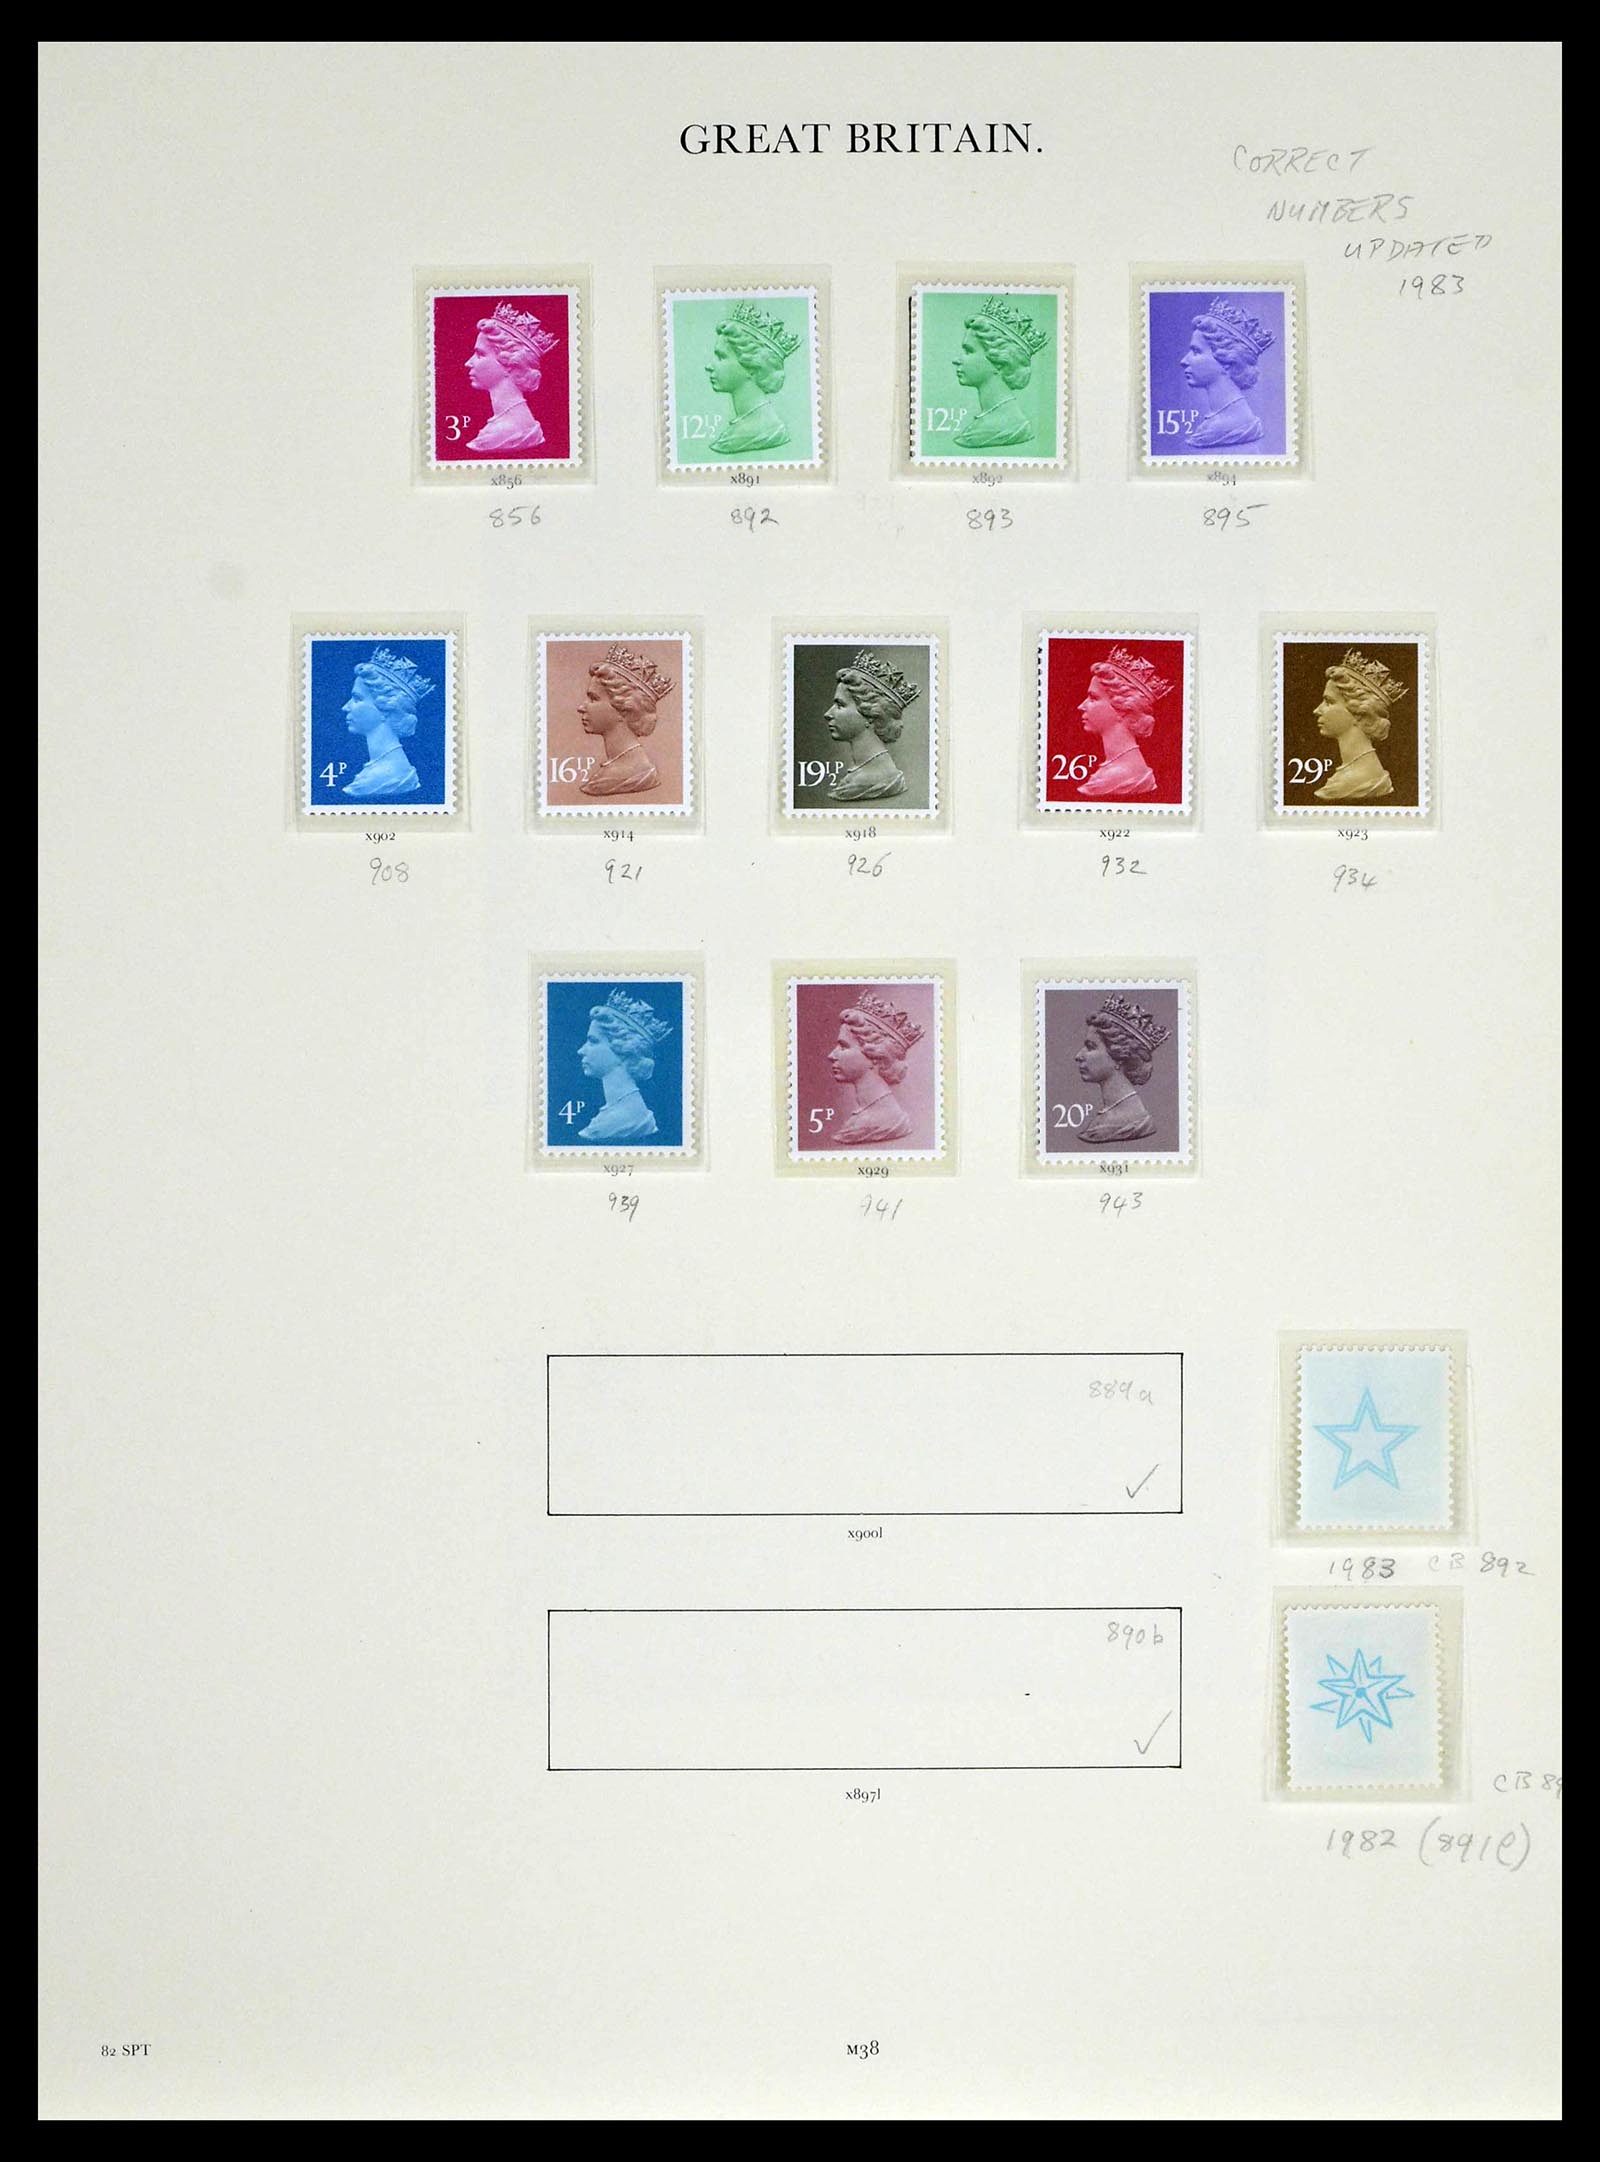 39025 0132 - Stamp collection 39025 Great Britain specialised 1840-1990.